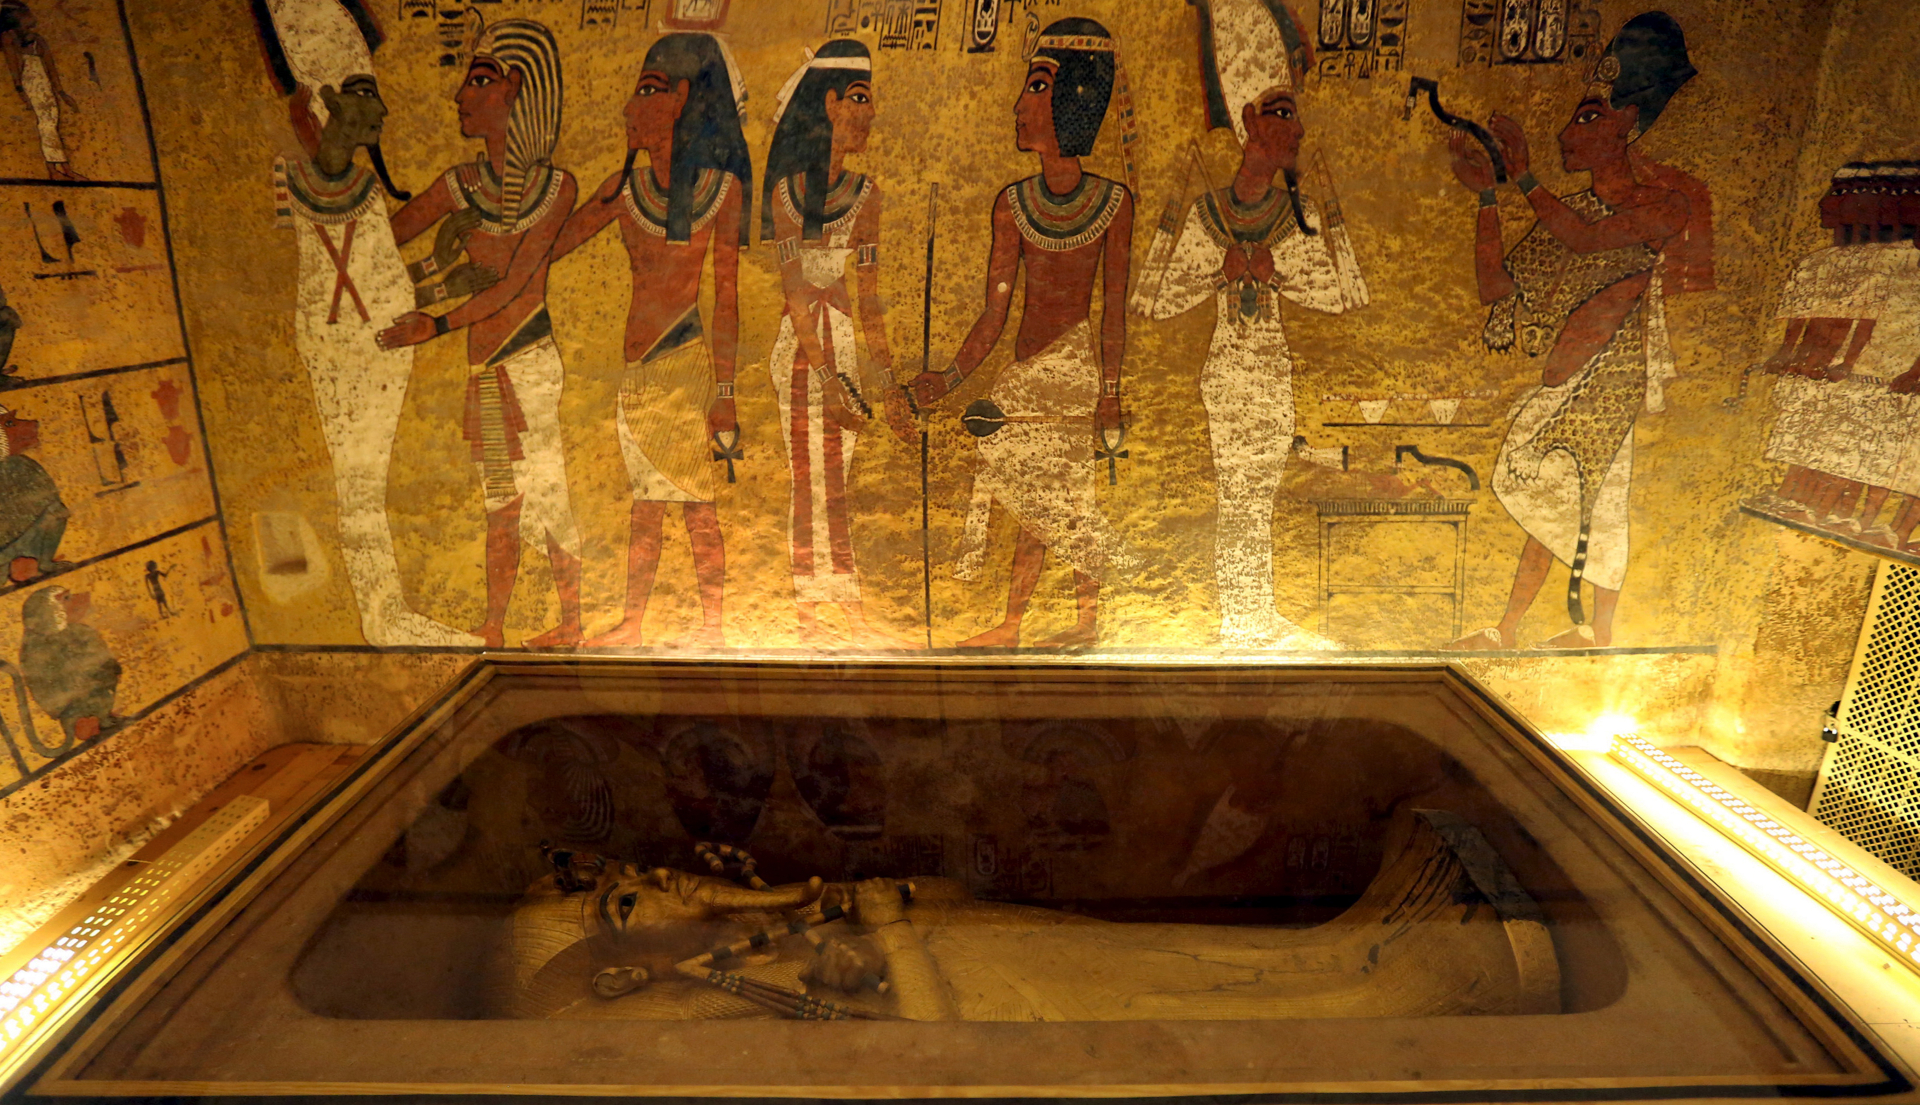 Epic Finds in Ancient Egypt: Secret Tunnels, Tattoos and King Tut’s Treasures